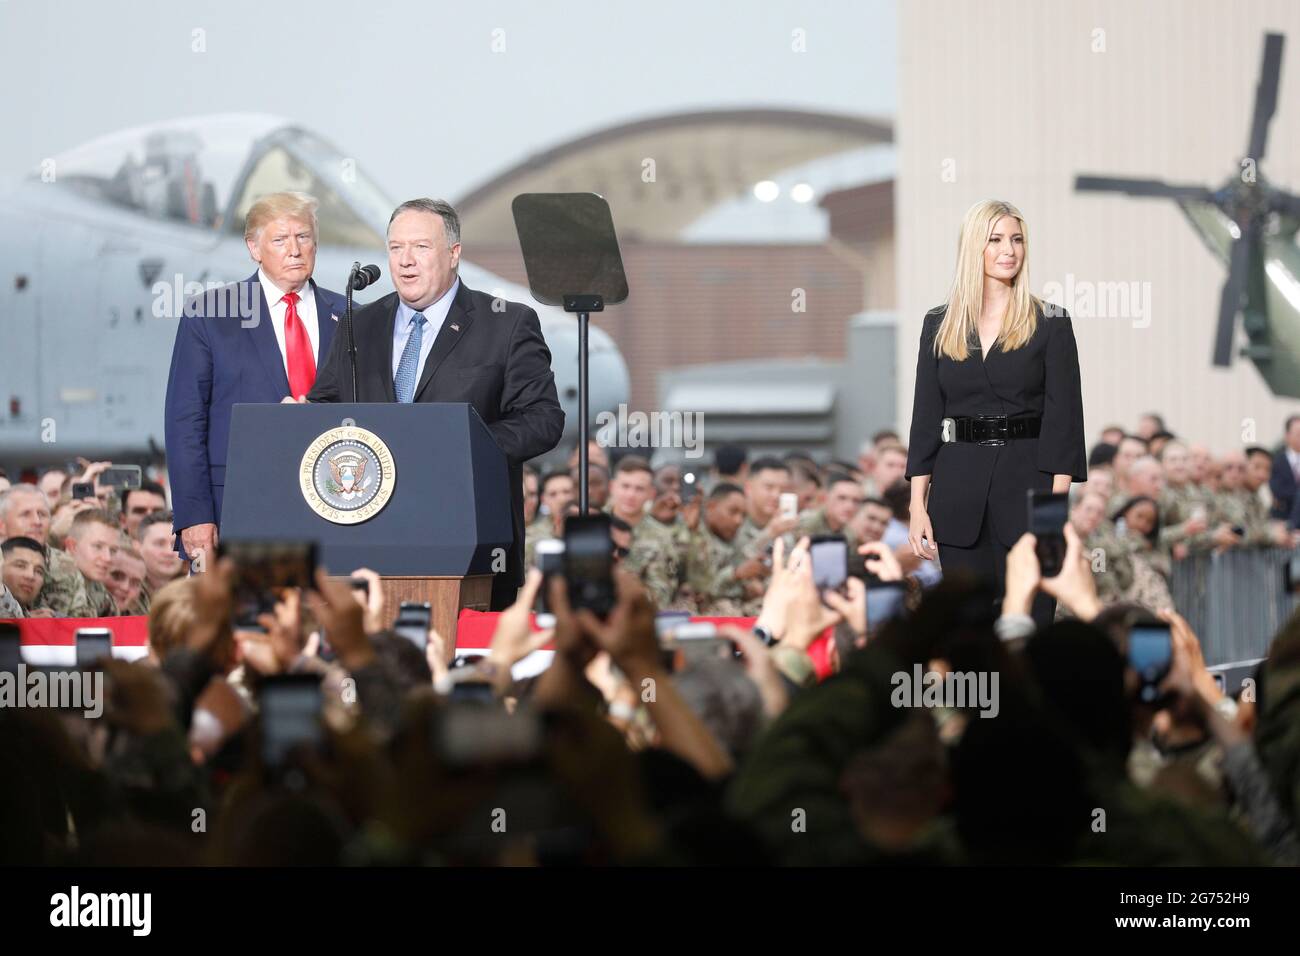 June 30, 2019-Osan, South Korea-US Secretary mike pompeo speech during the US military meeting event at Osan Military Airbase, South Korea. Stock Photo